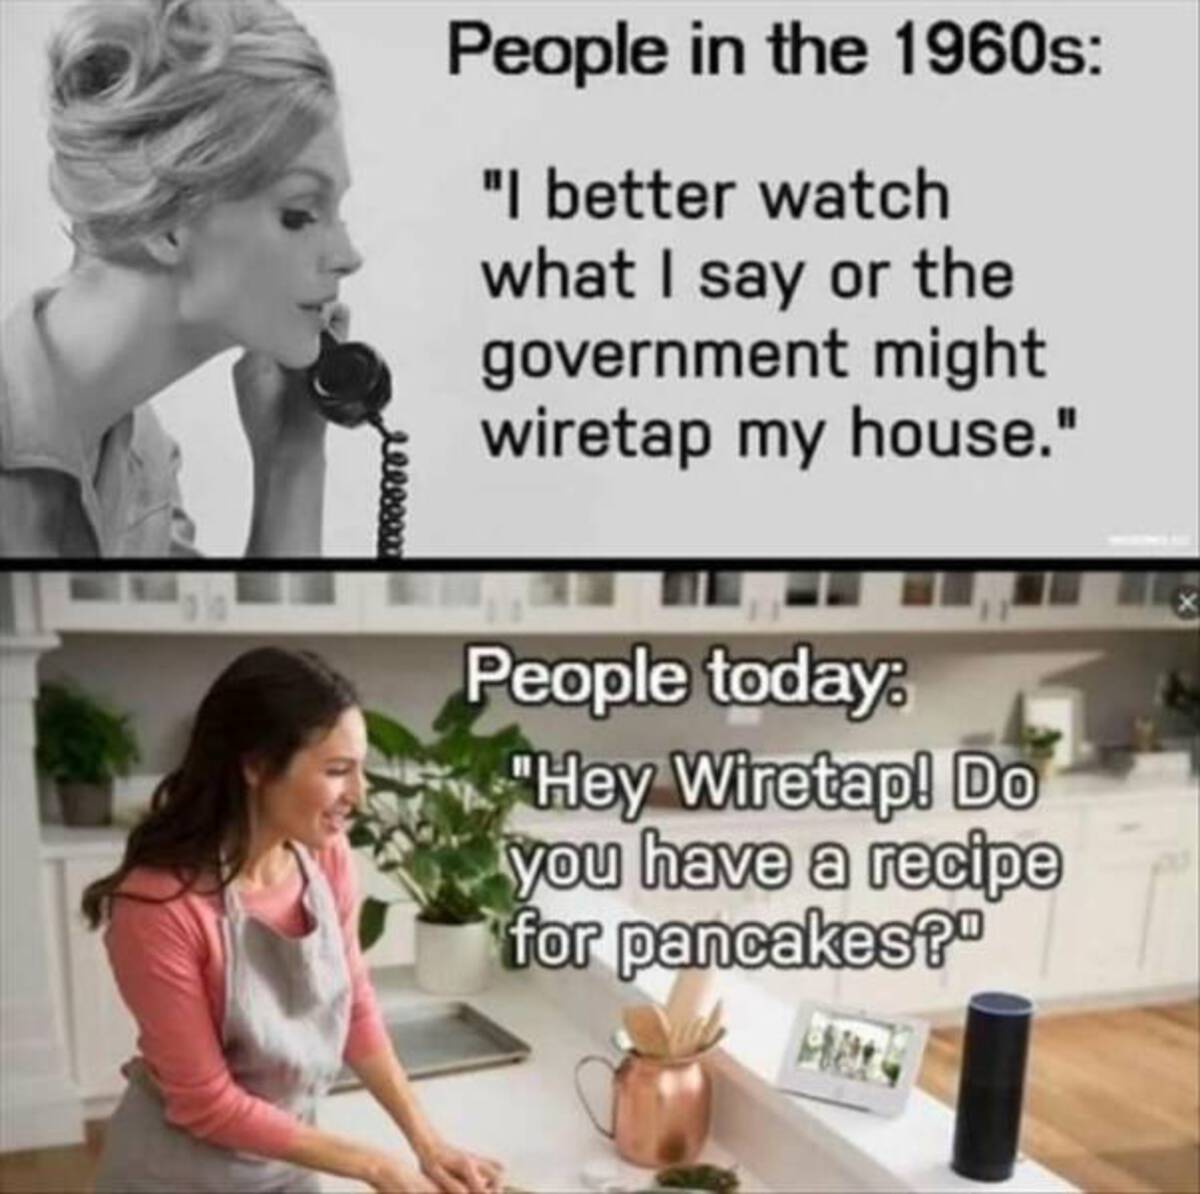 alexa wiretap meme - People in the 1960s "I better watch what I say or the government might wiretap my house." People today "Hey Wiretap! Do you have a recipe for pancakes?" eeeeex